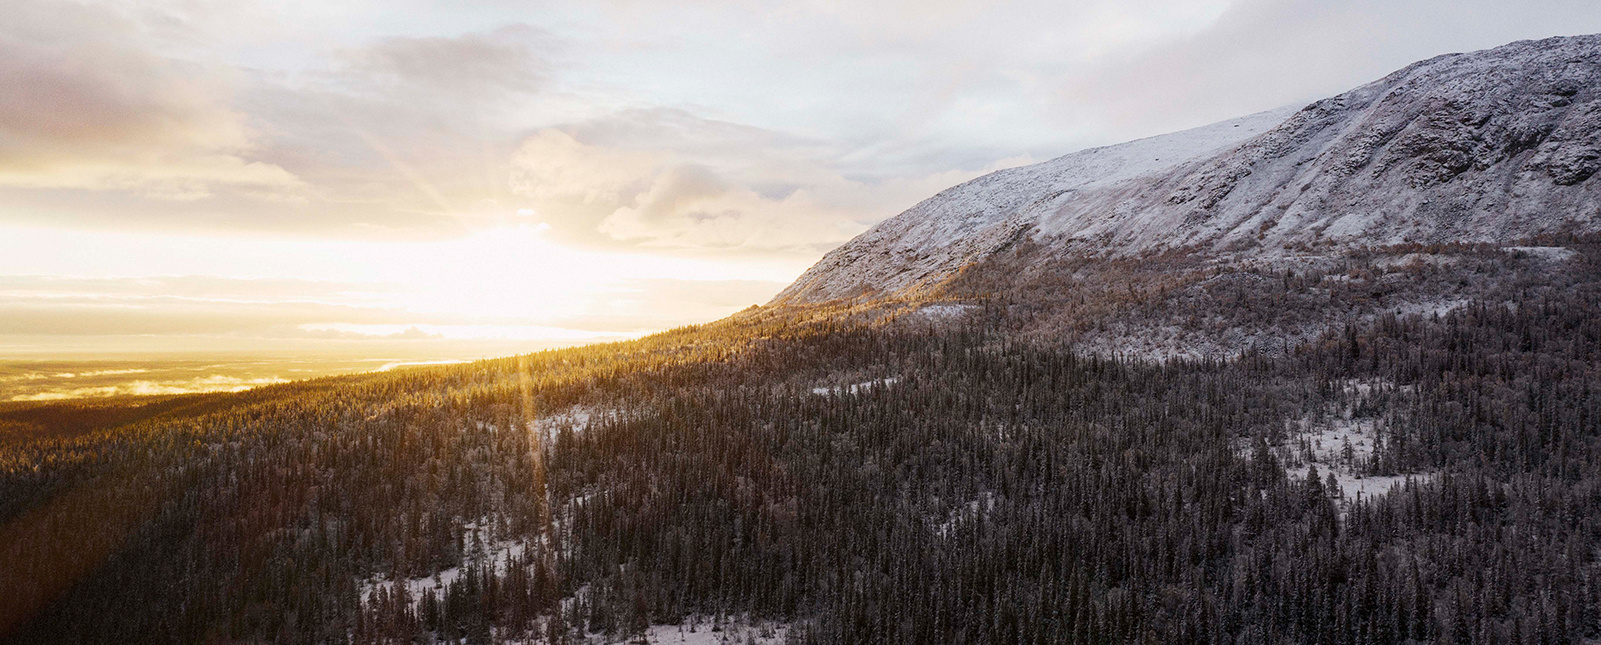 Sunrise over a snow dusted tree covered mountain. 